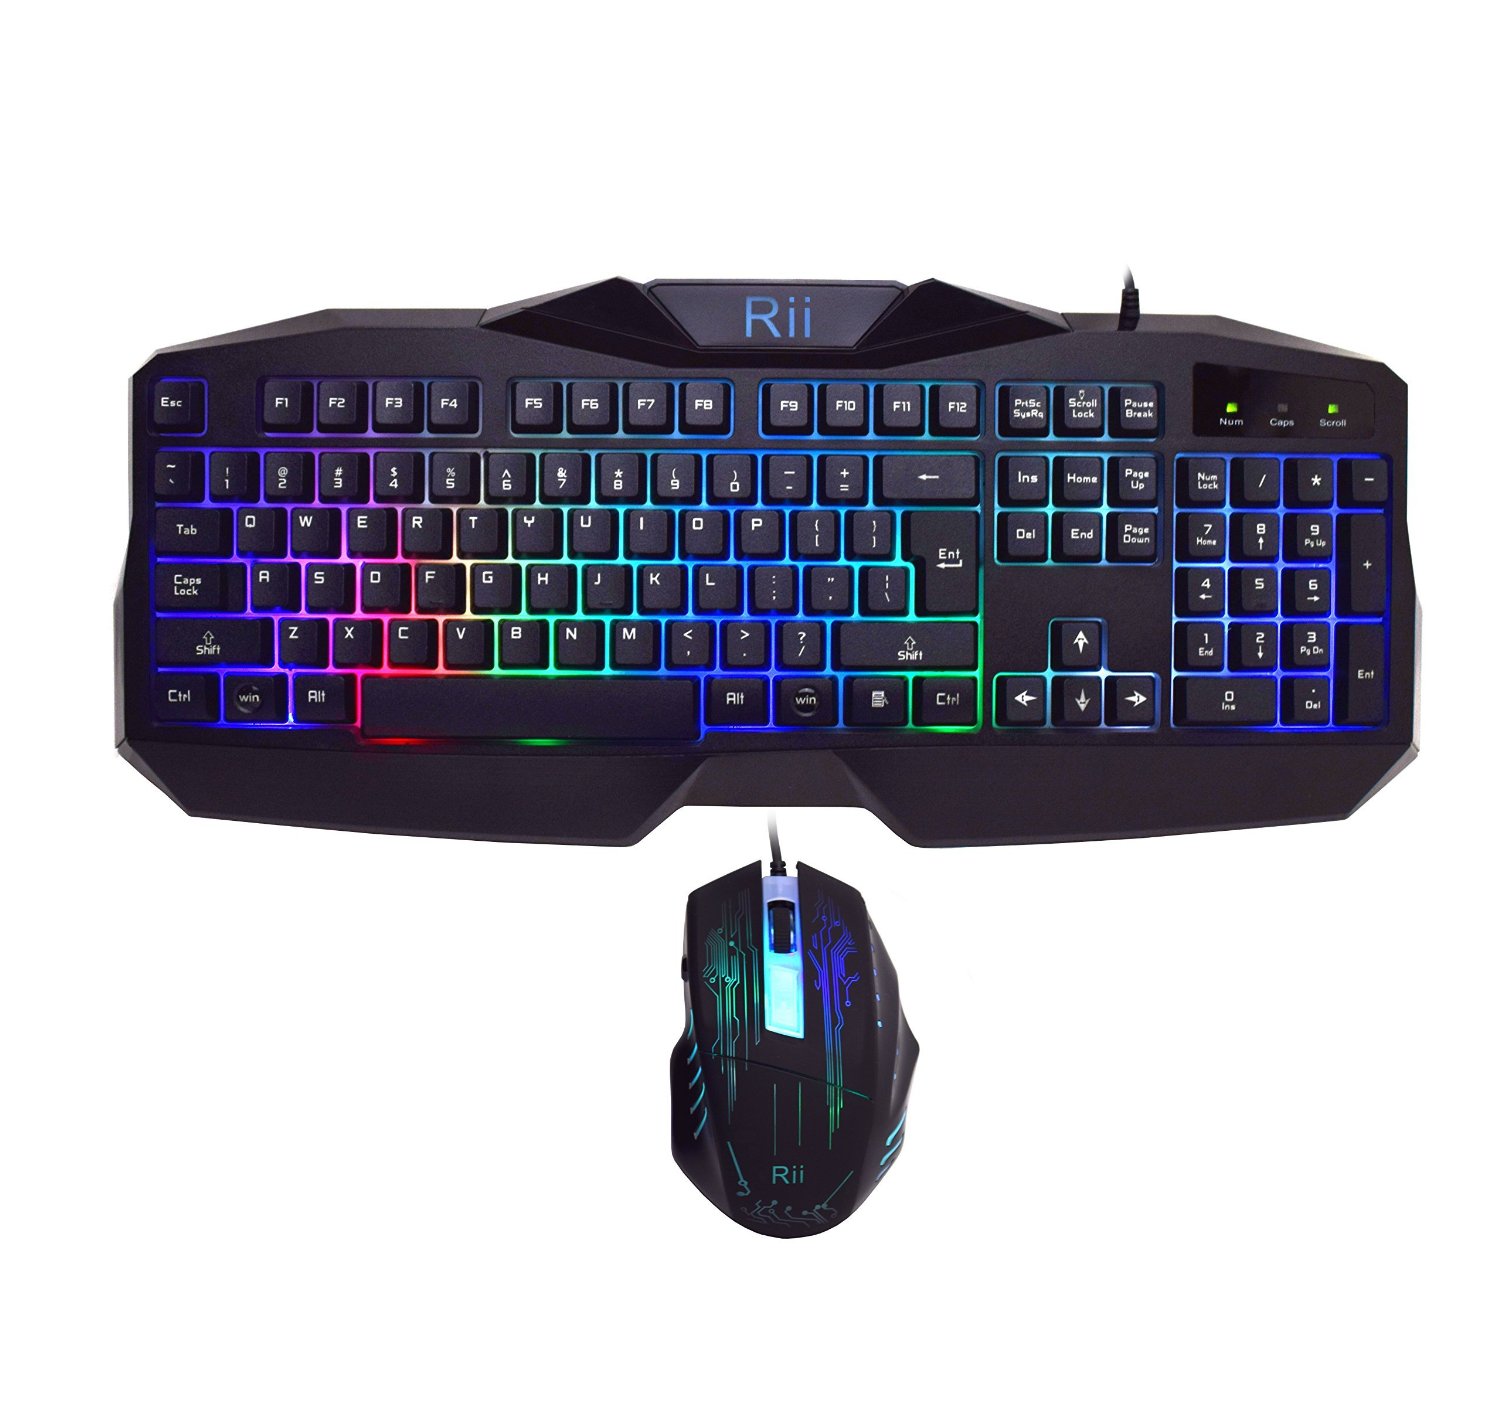 What are some good keyboards for gamers?